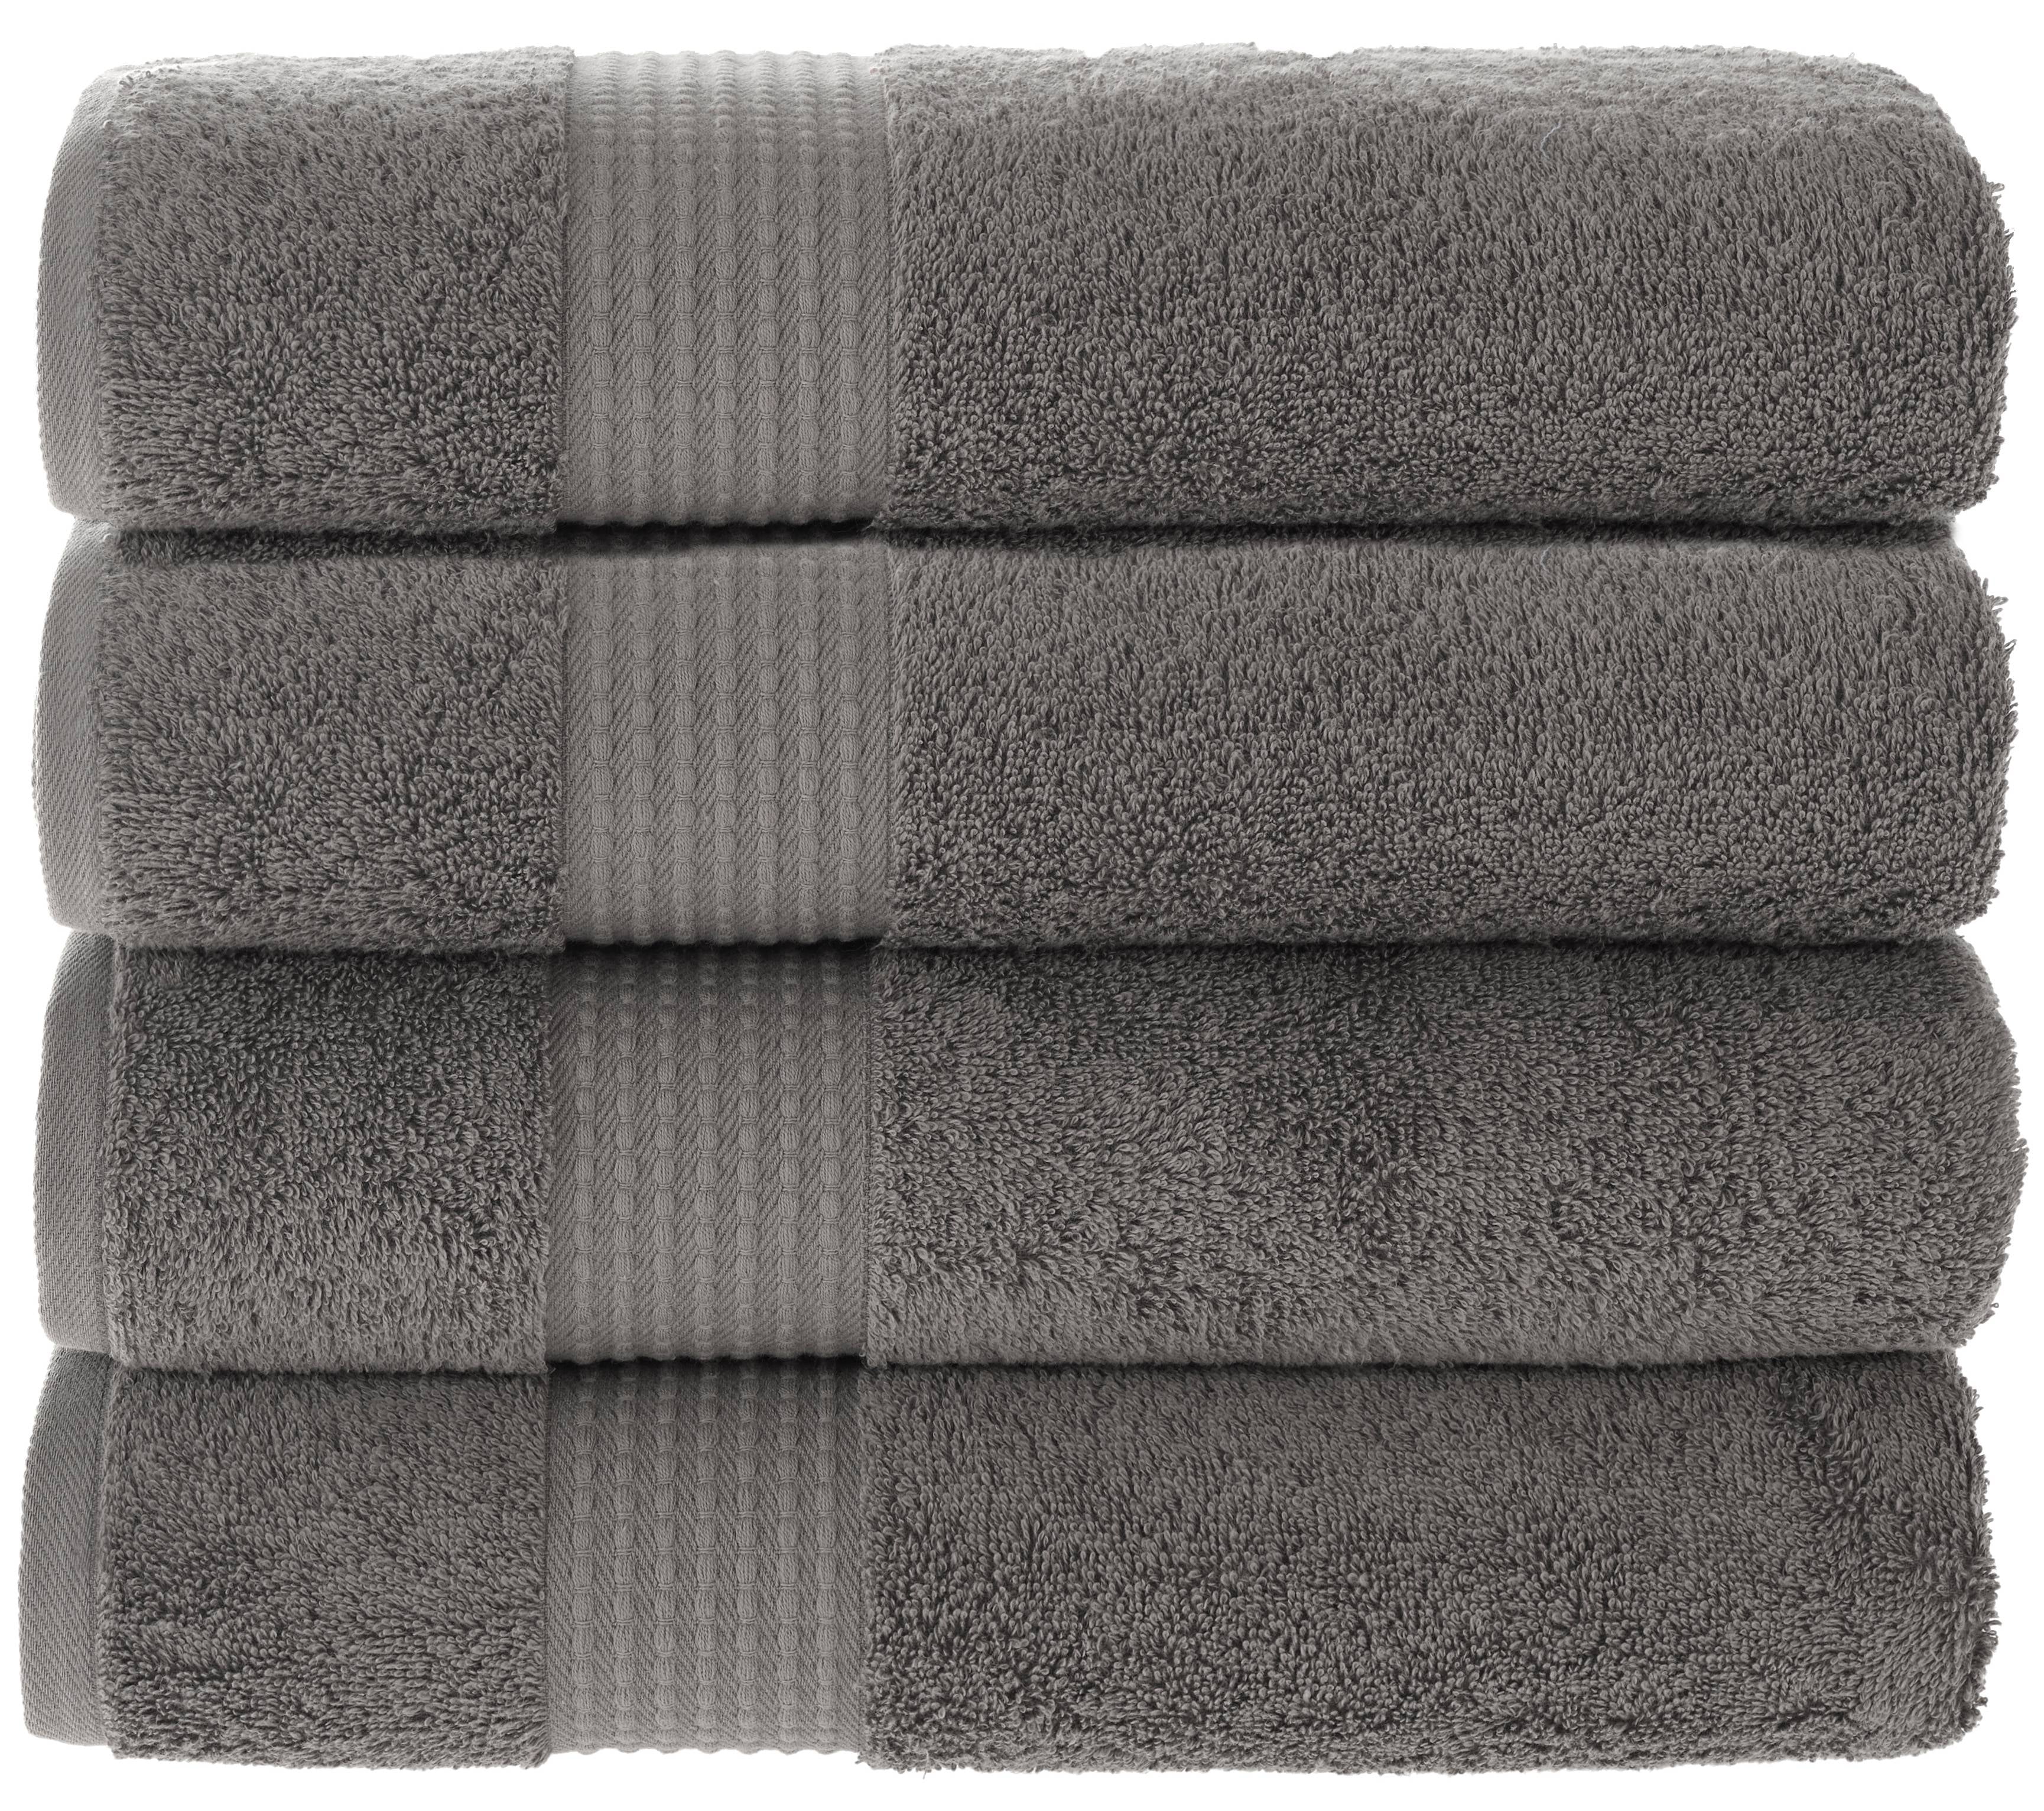 MAURA Basics Performance Bath Towels with Hanging Loop. 30”x56” American  Standard Towel size. Soft, Durable, Long Lasting and Absorbent 100% Turkish  Cotton Bath Towels Set for Bathroom 